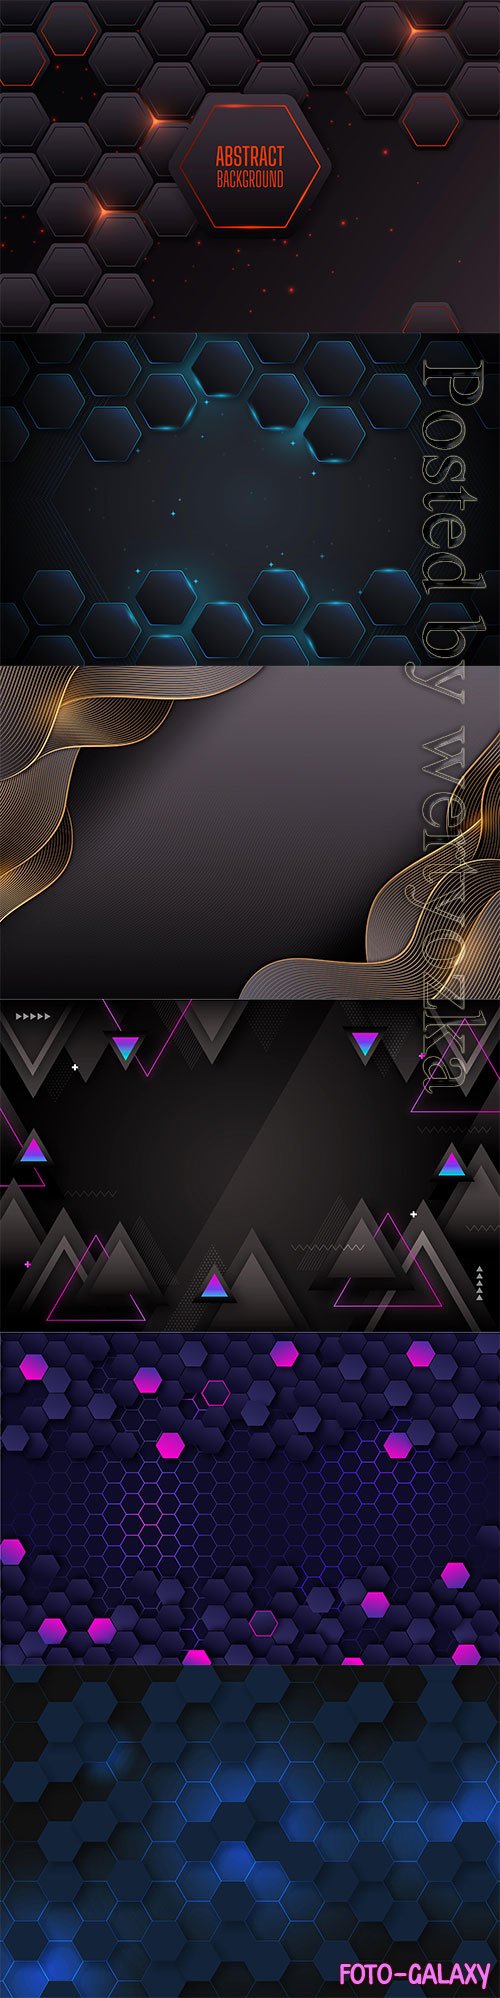 Luxury abstract geometric vector background